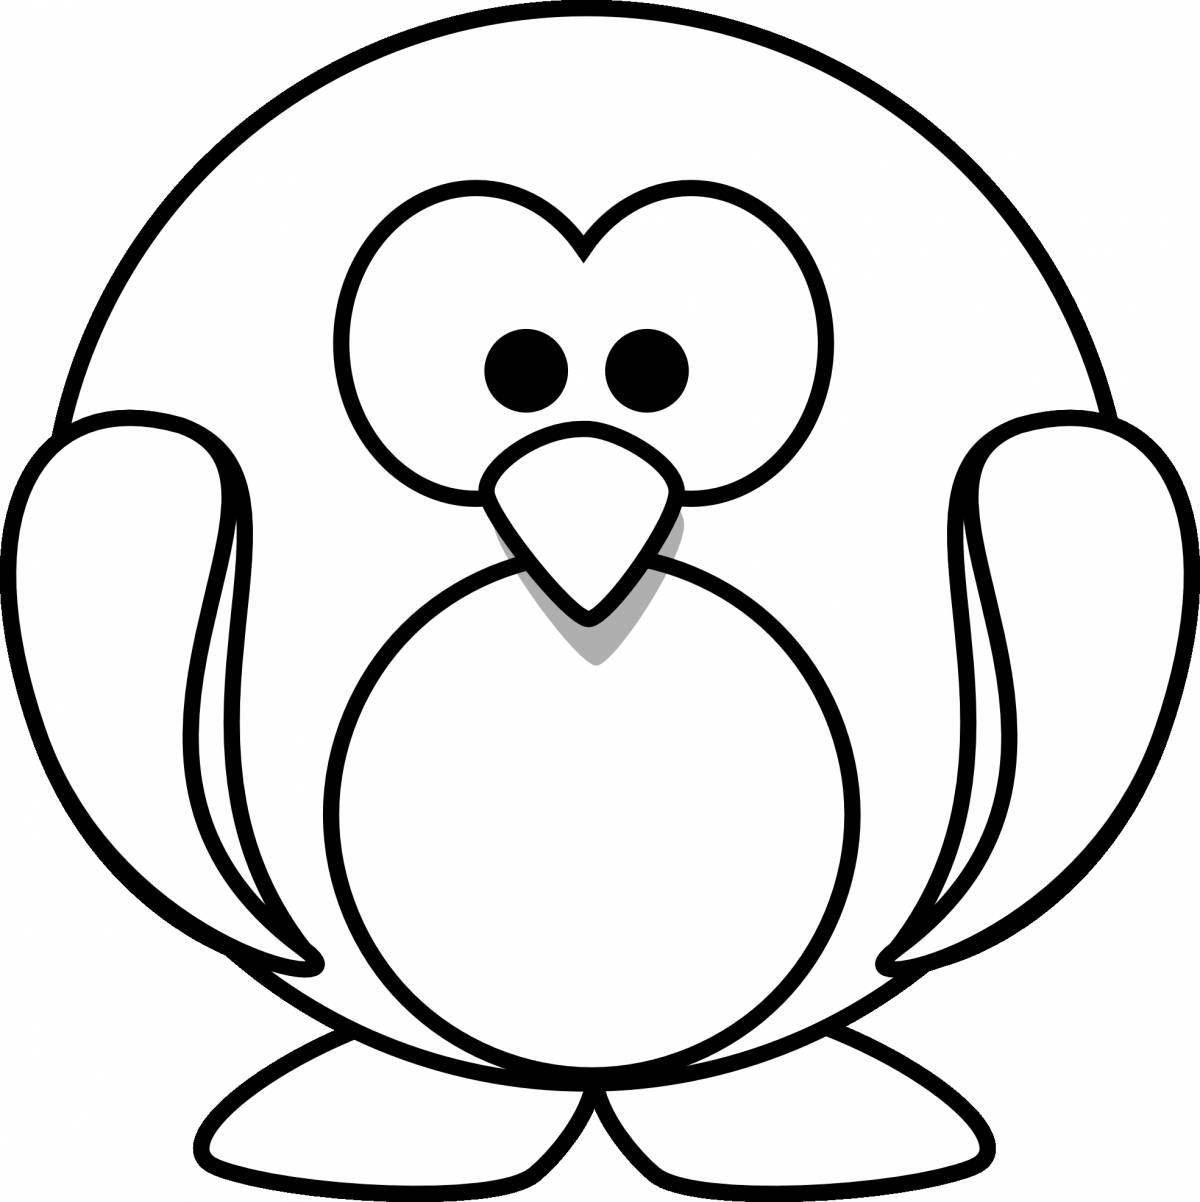 Grinning penguin coloring page